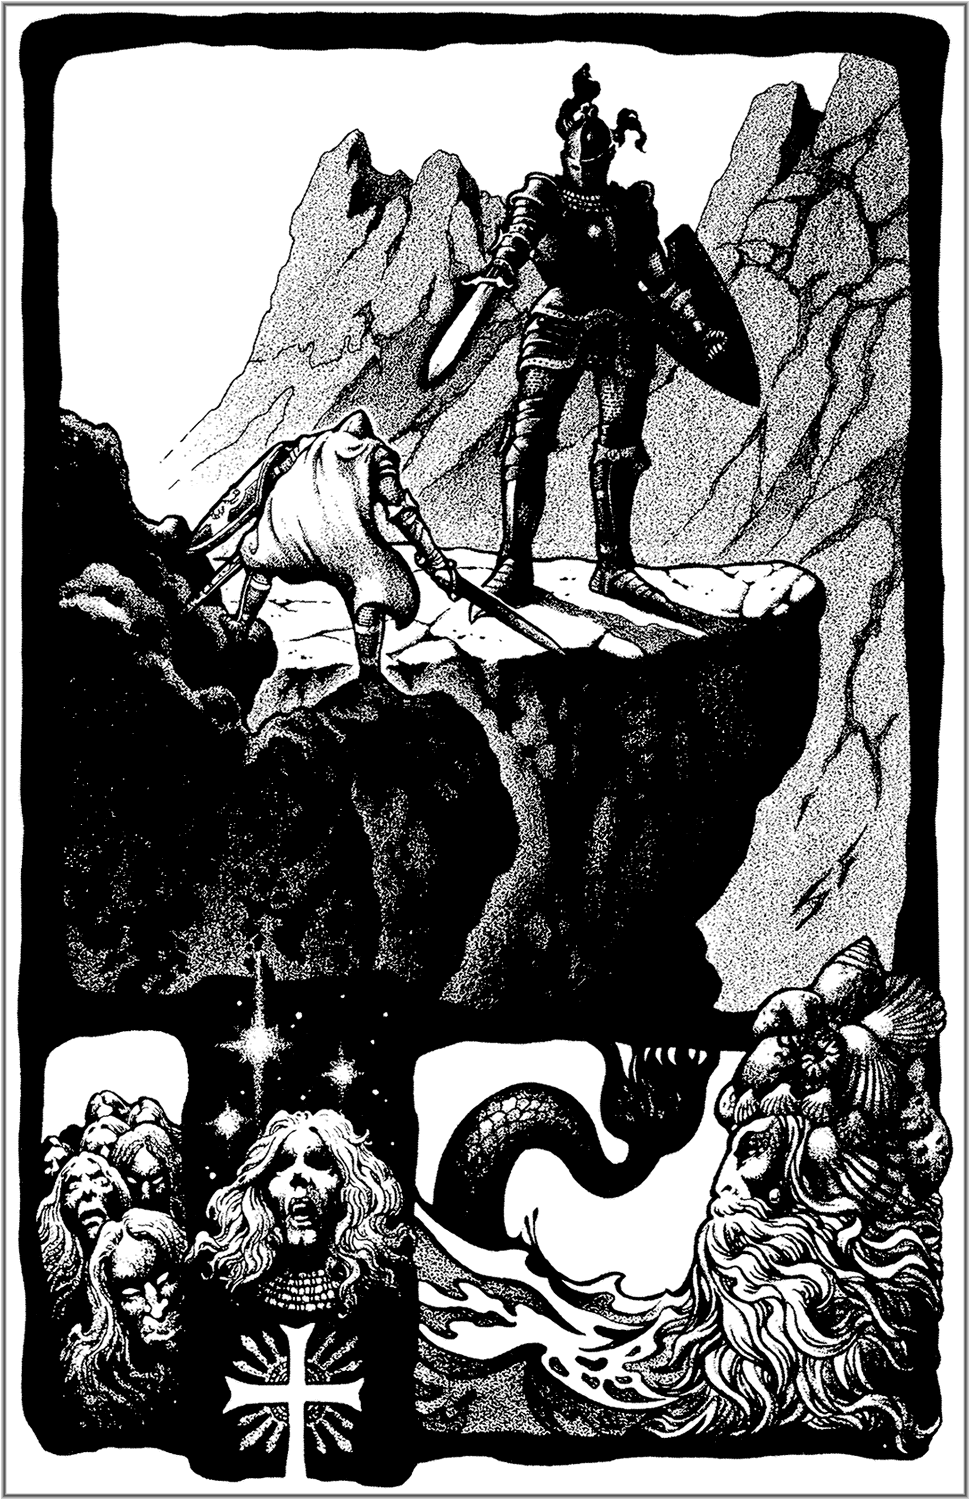 Black and white art from various pulp magazines stories - Page 6 Xxx_1510